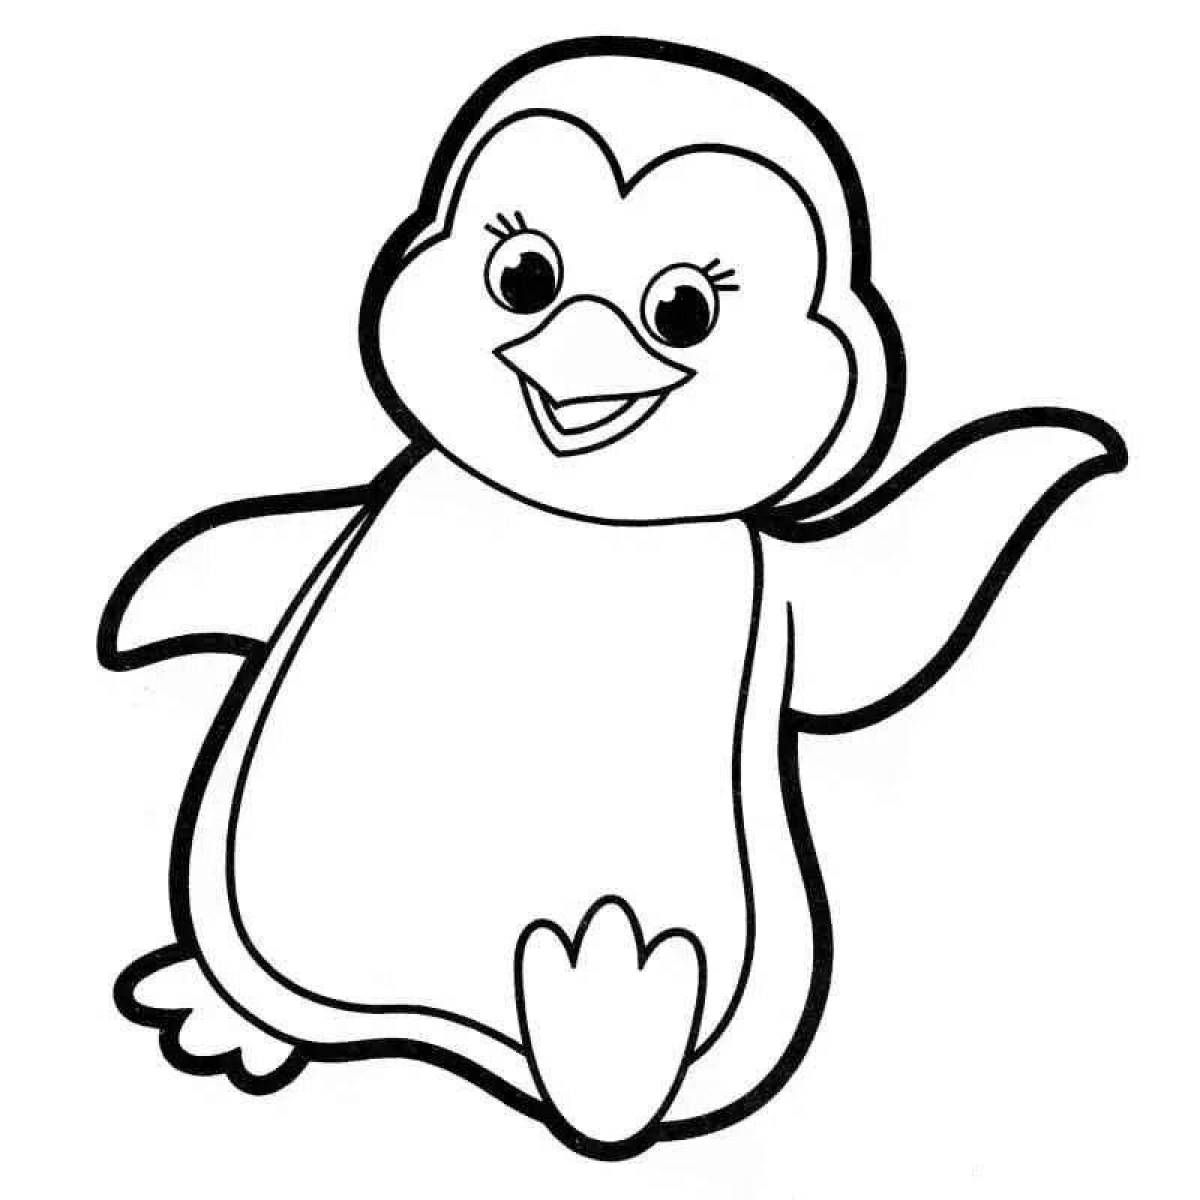 Coloring page glamor penguin on ice